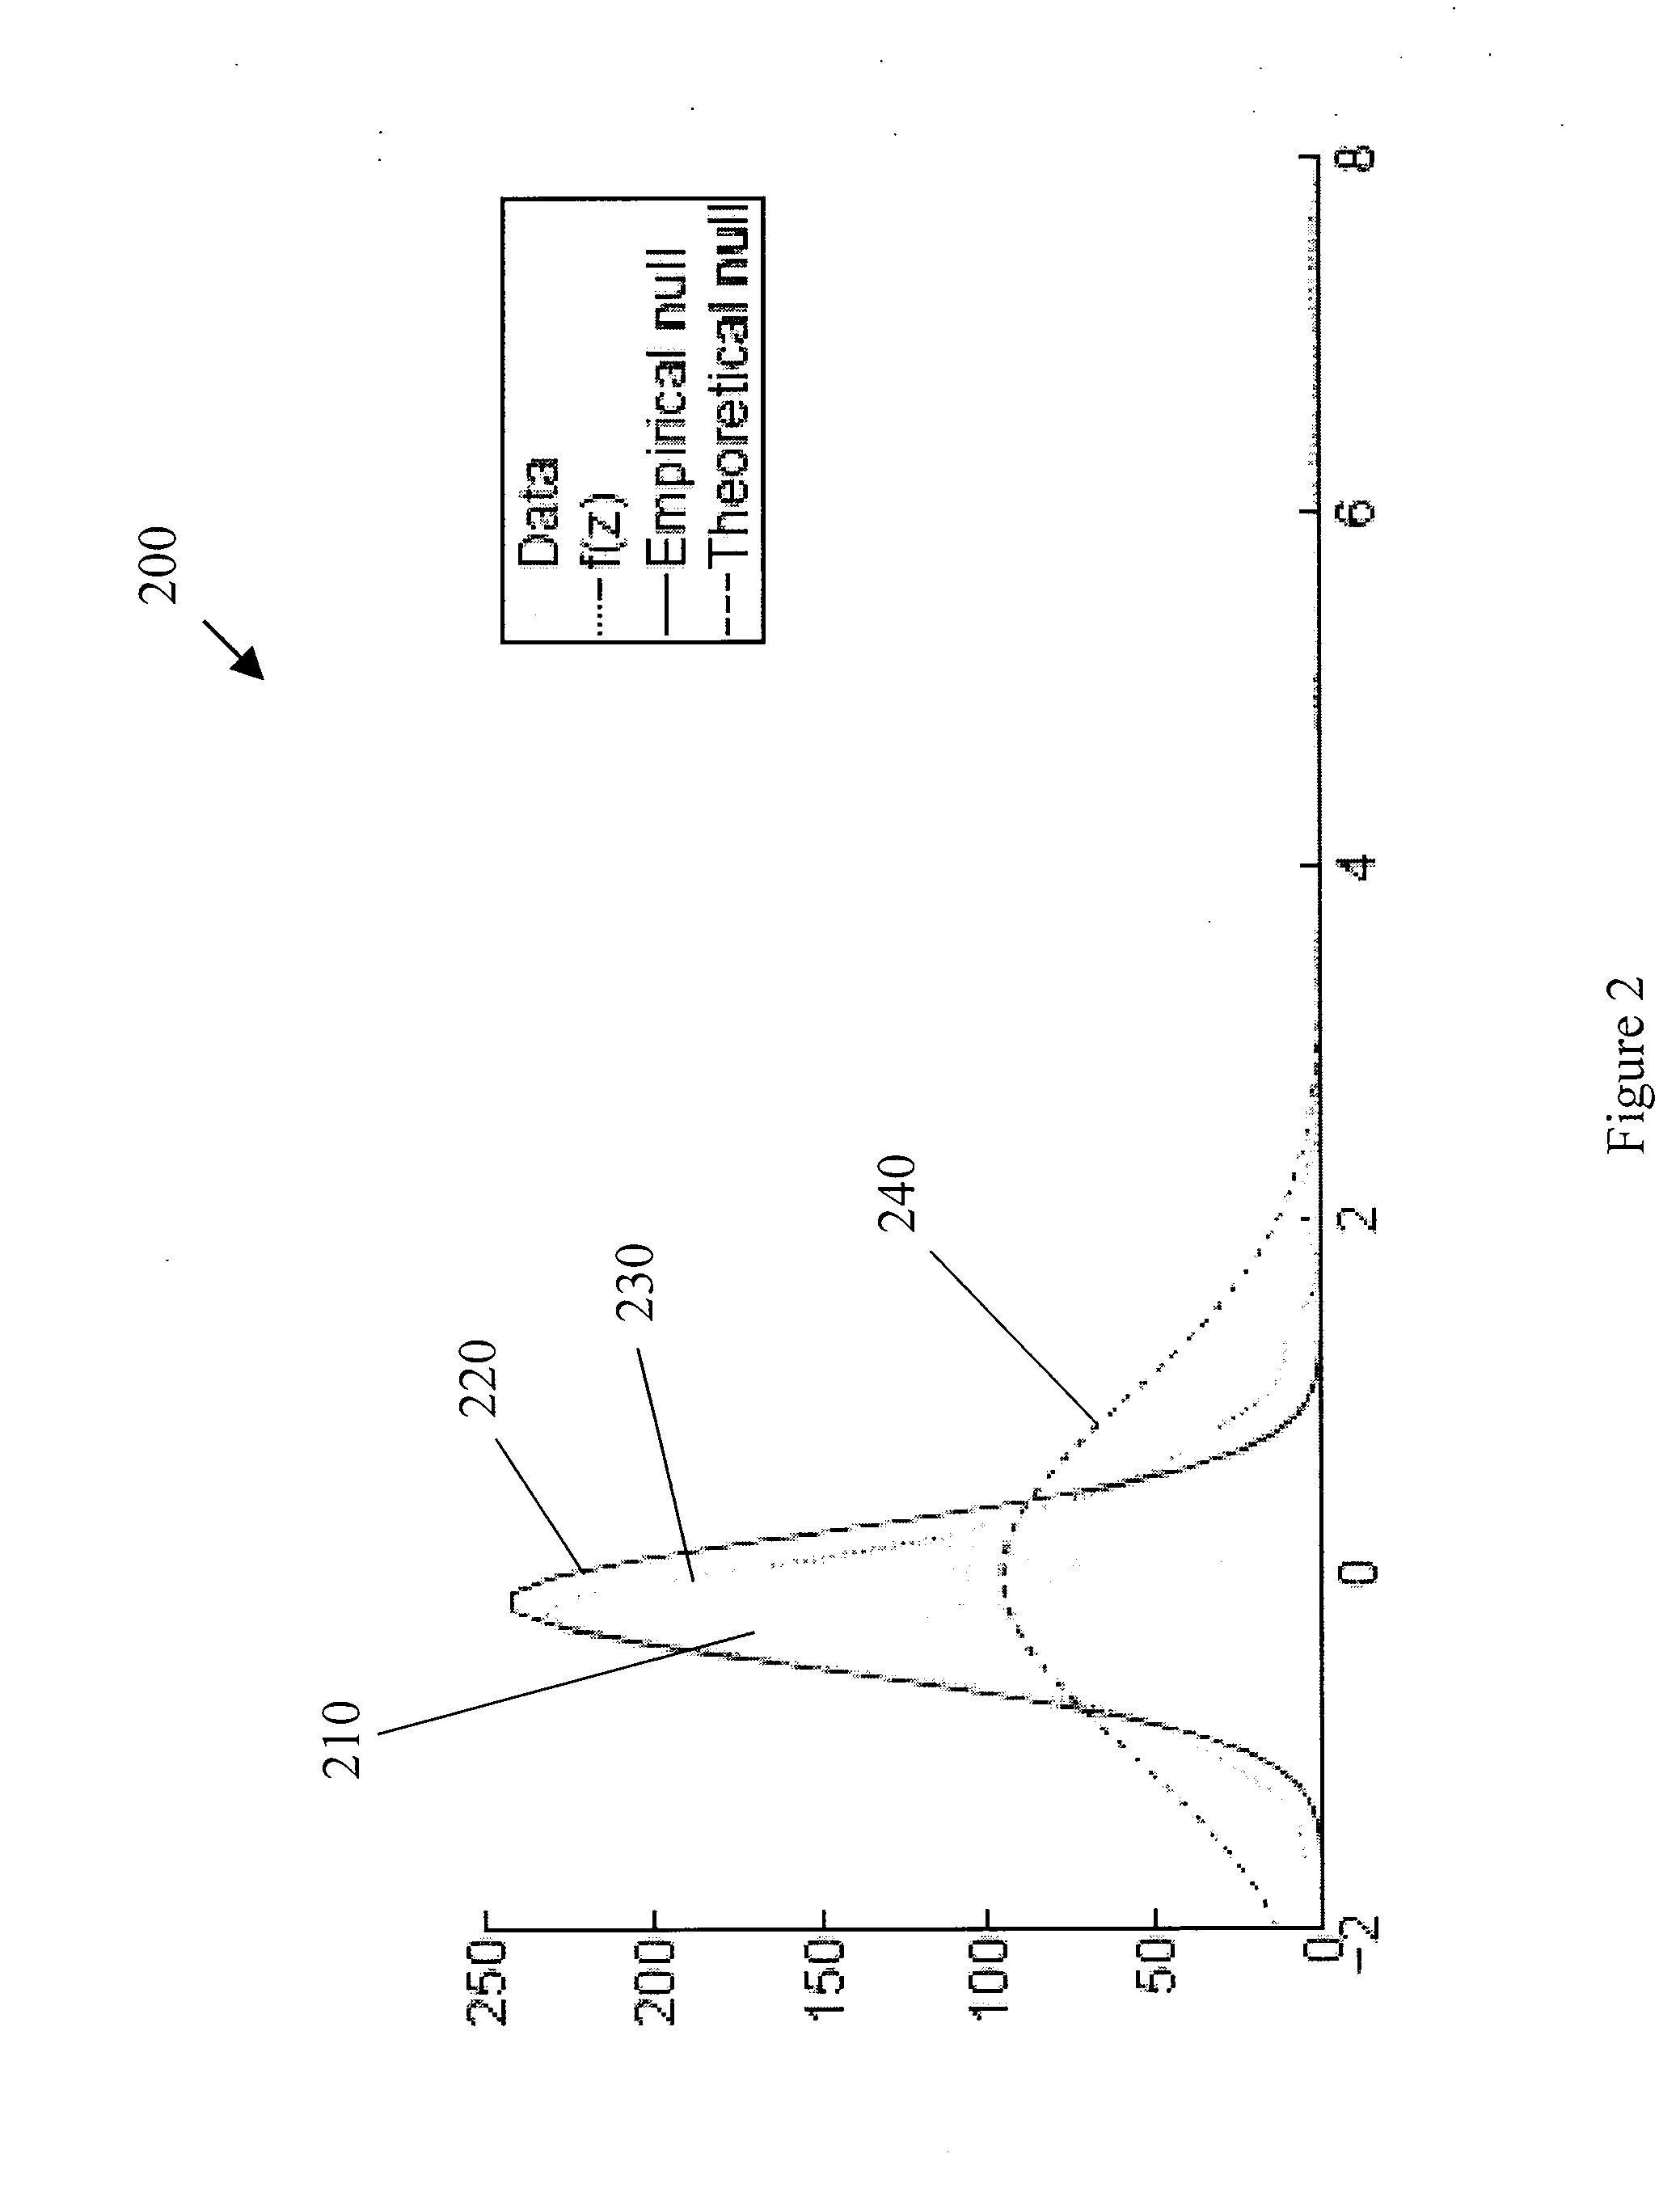 Method, system, and computer-accessible medium for inferring and/or determining causation in time course data with temporal logic